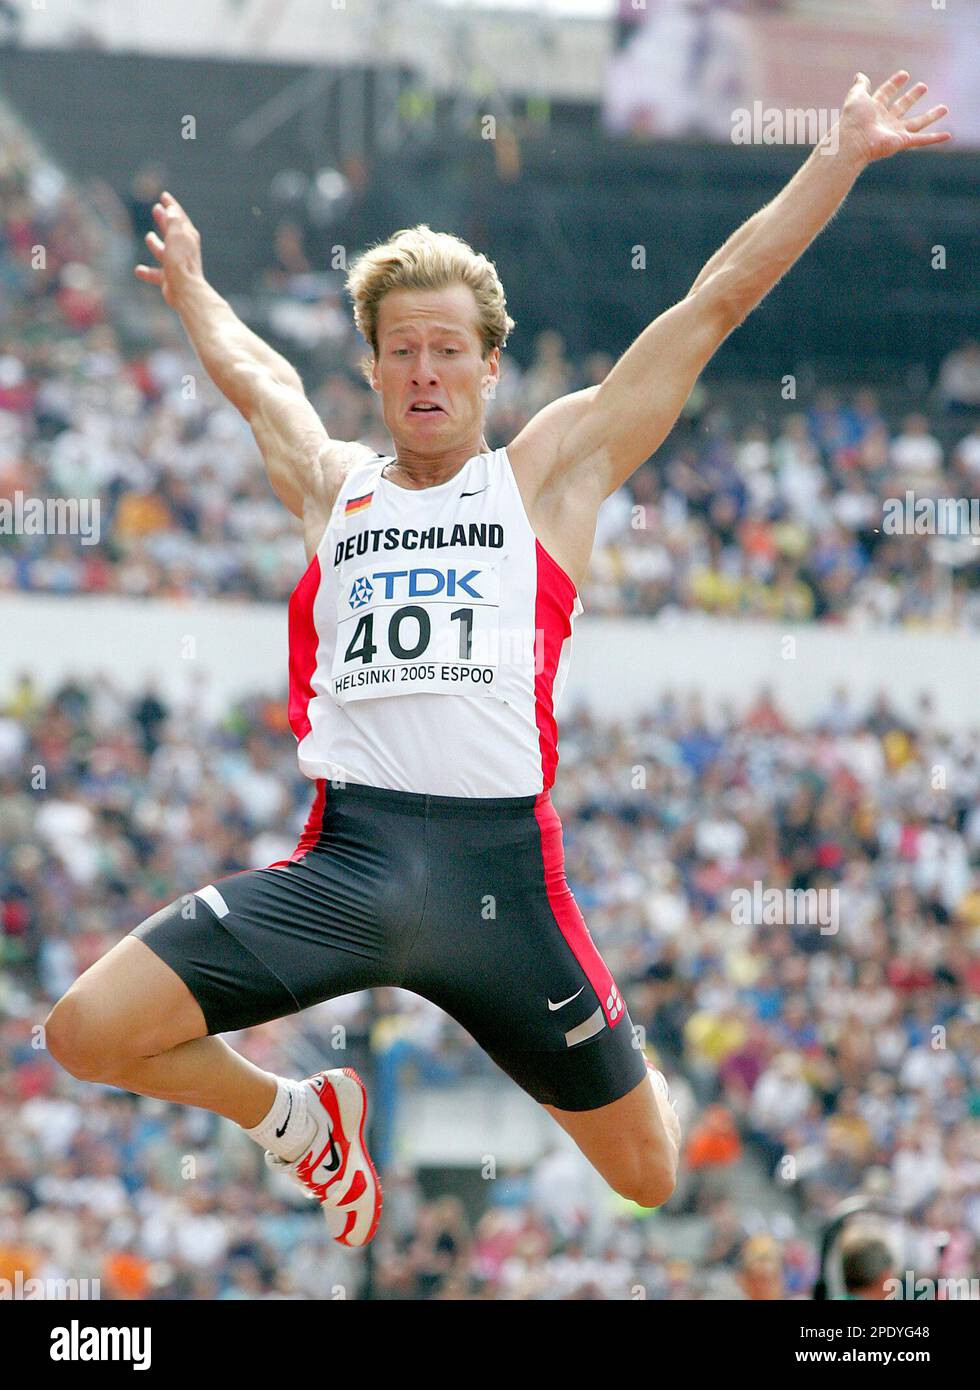 Germany's Andre Niklaus competes in the Decathlon long jump, at the 10th  World Athletics Championships in Helsinki, Finland, Tuesday, Aug. 9, 2005.  (AP Photo/Martin Meissner Stock Photo - Alamy